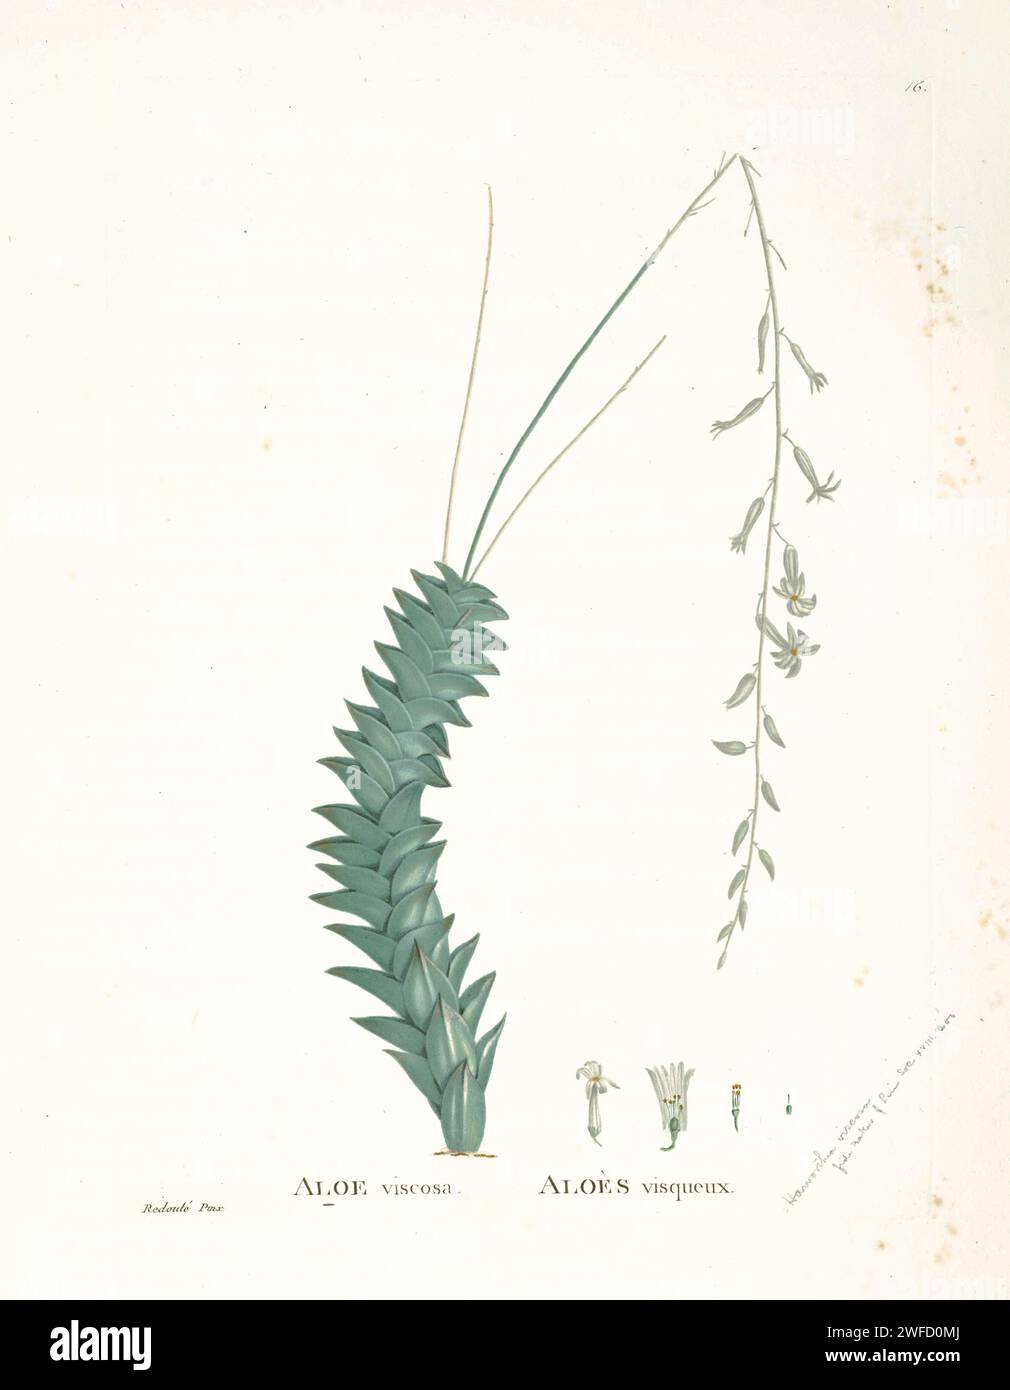 Haworthia viscosa (L.) Haw. Here As Aloe viscosa from History of Succulent Plants [Plantarum historia succulentarum / Histoire des plantes grasses] painted by Pierre-Joseph Redouté and described by Augustin Pyramus de Candolle Haworthiopsis viscosa, formerly Haworthia viscosa, is a species of flowering succulent plant from the Western and Eastern Cape Provinces, South Africa. Stock Photo